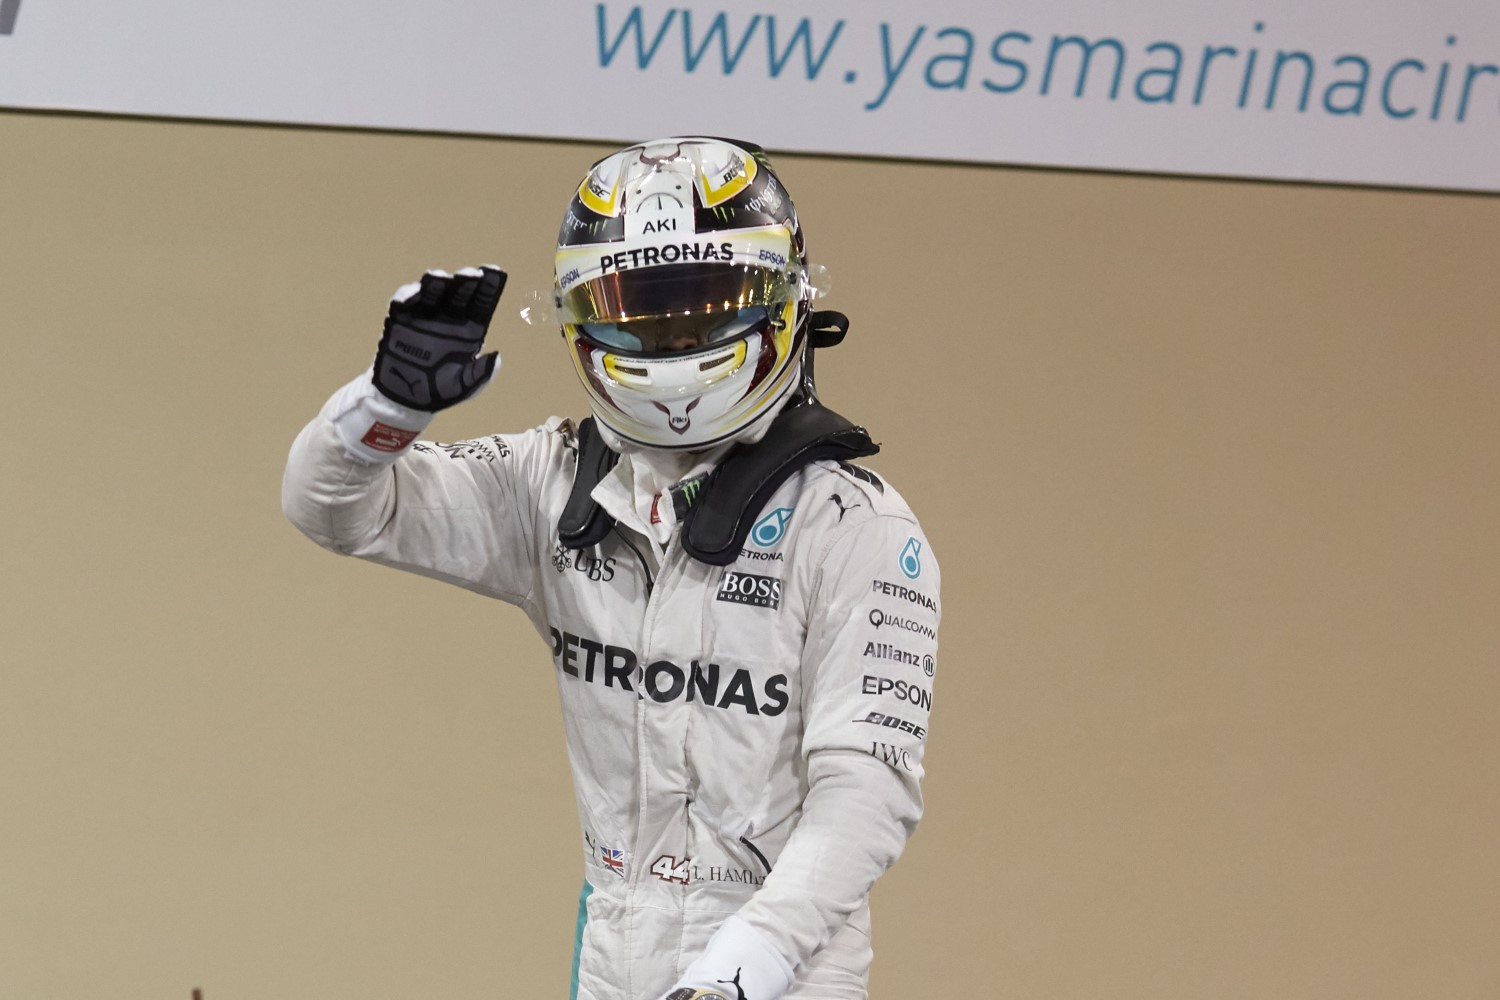 Hamilton will never leave the best car in F1 of his own doing. But the team could sack him.